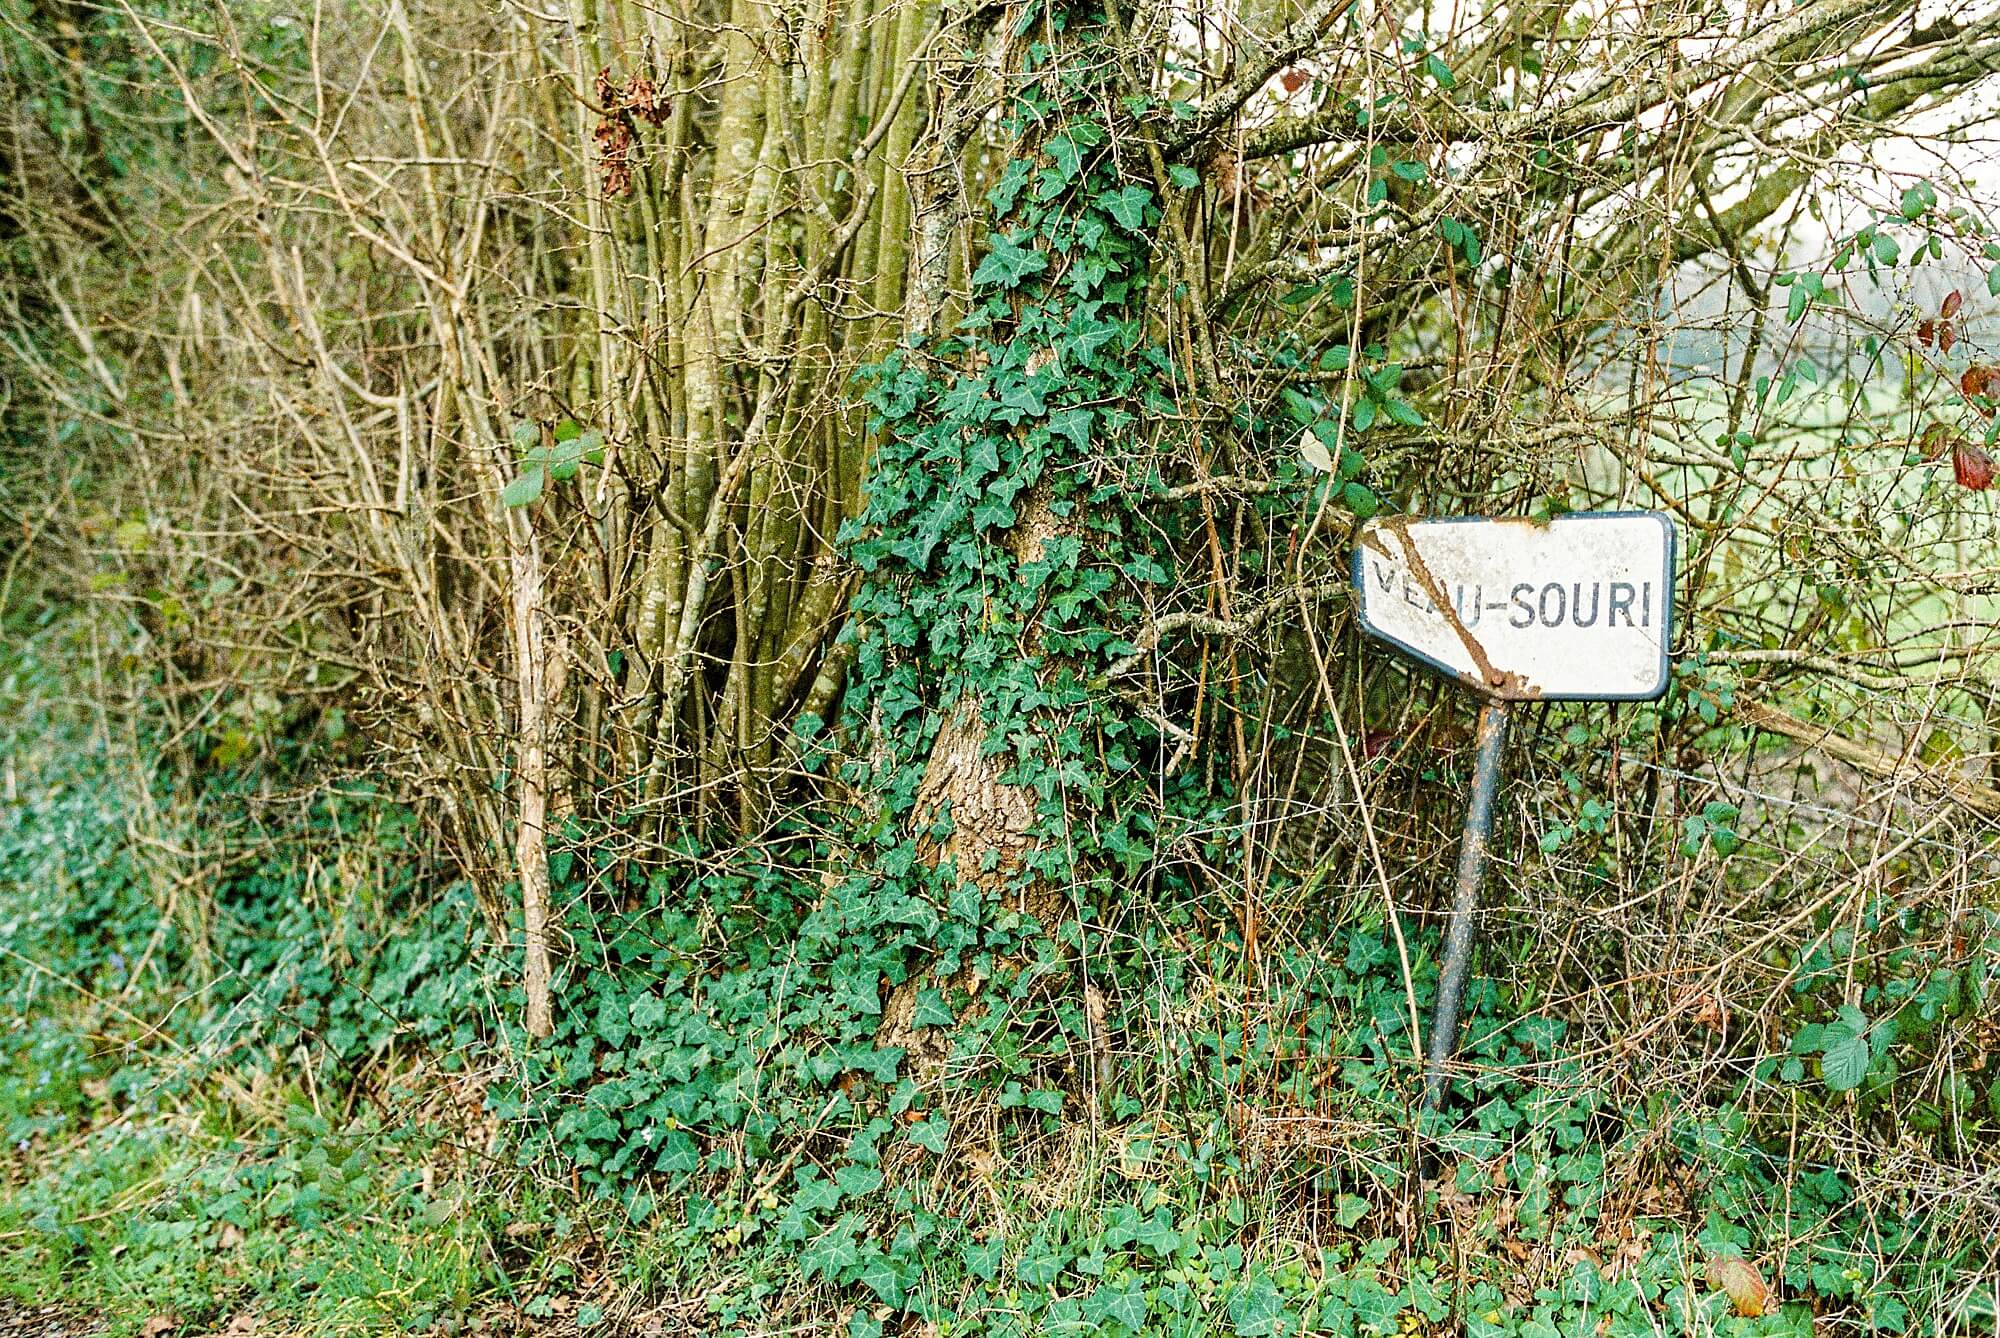 A bent, leaning post reads "Veau Souri" as a tangle of vines and branches threaten to overtake it.